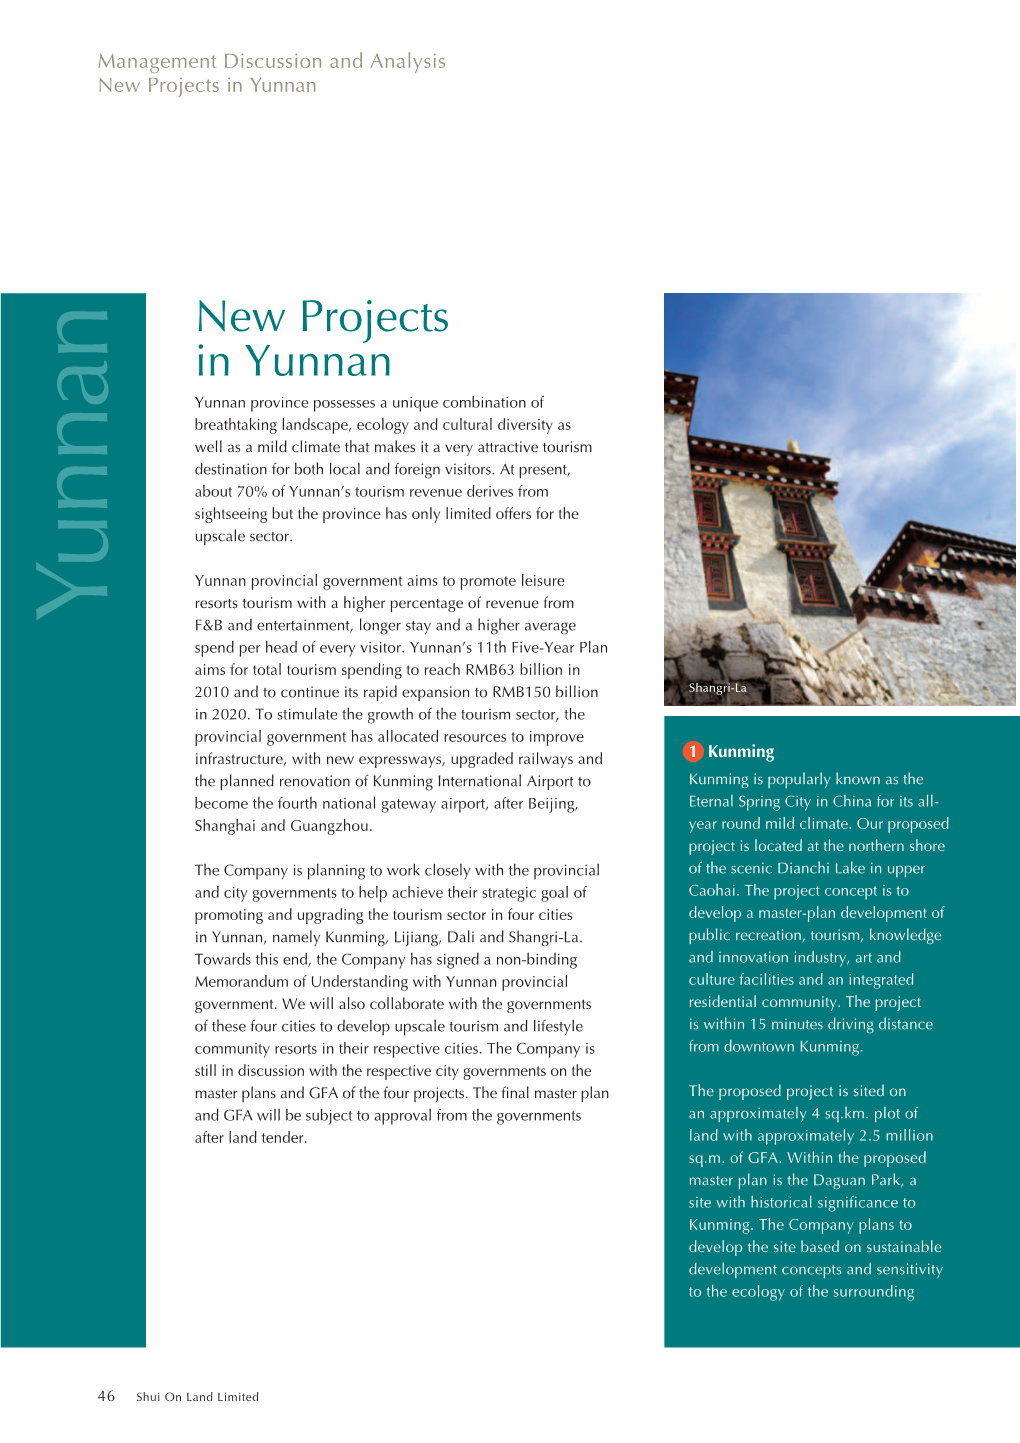 New Projects in Yunnan